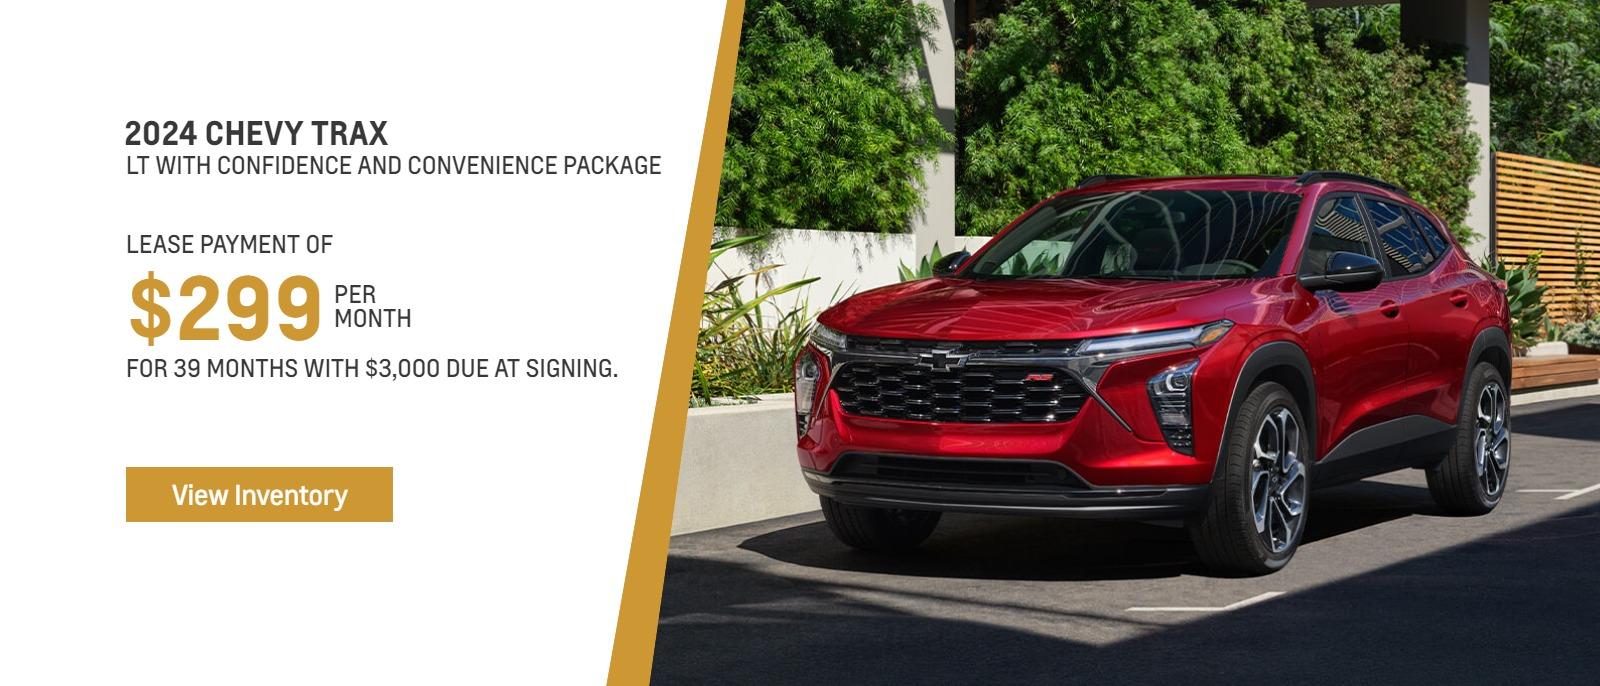 2024 Chevy Trax LT with confidence and convenience package. 
Lease payment of $299 for
39 months with $3000 due at signing.